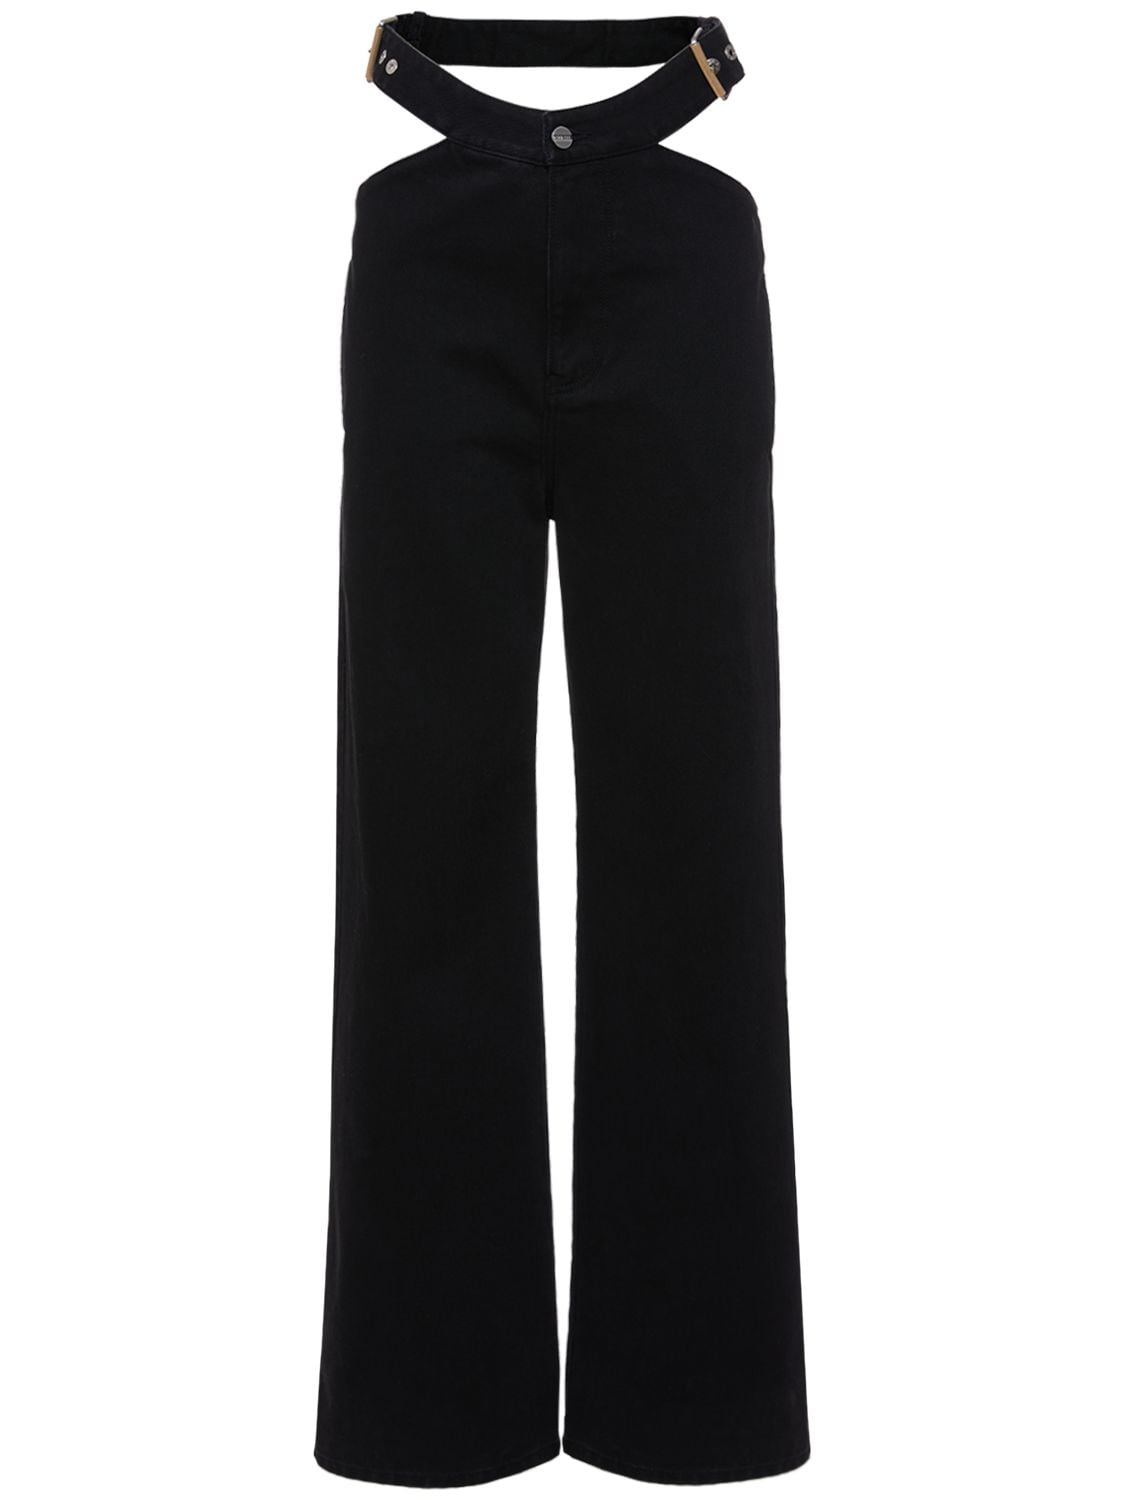 DION LEE Y-front Cutout Straight Denim Jeans